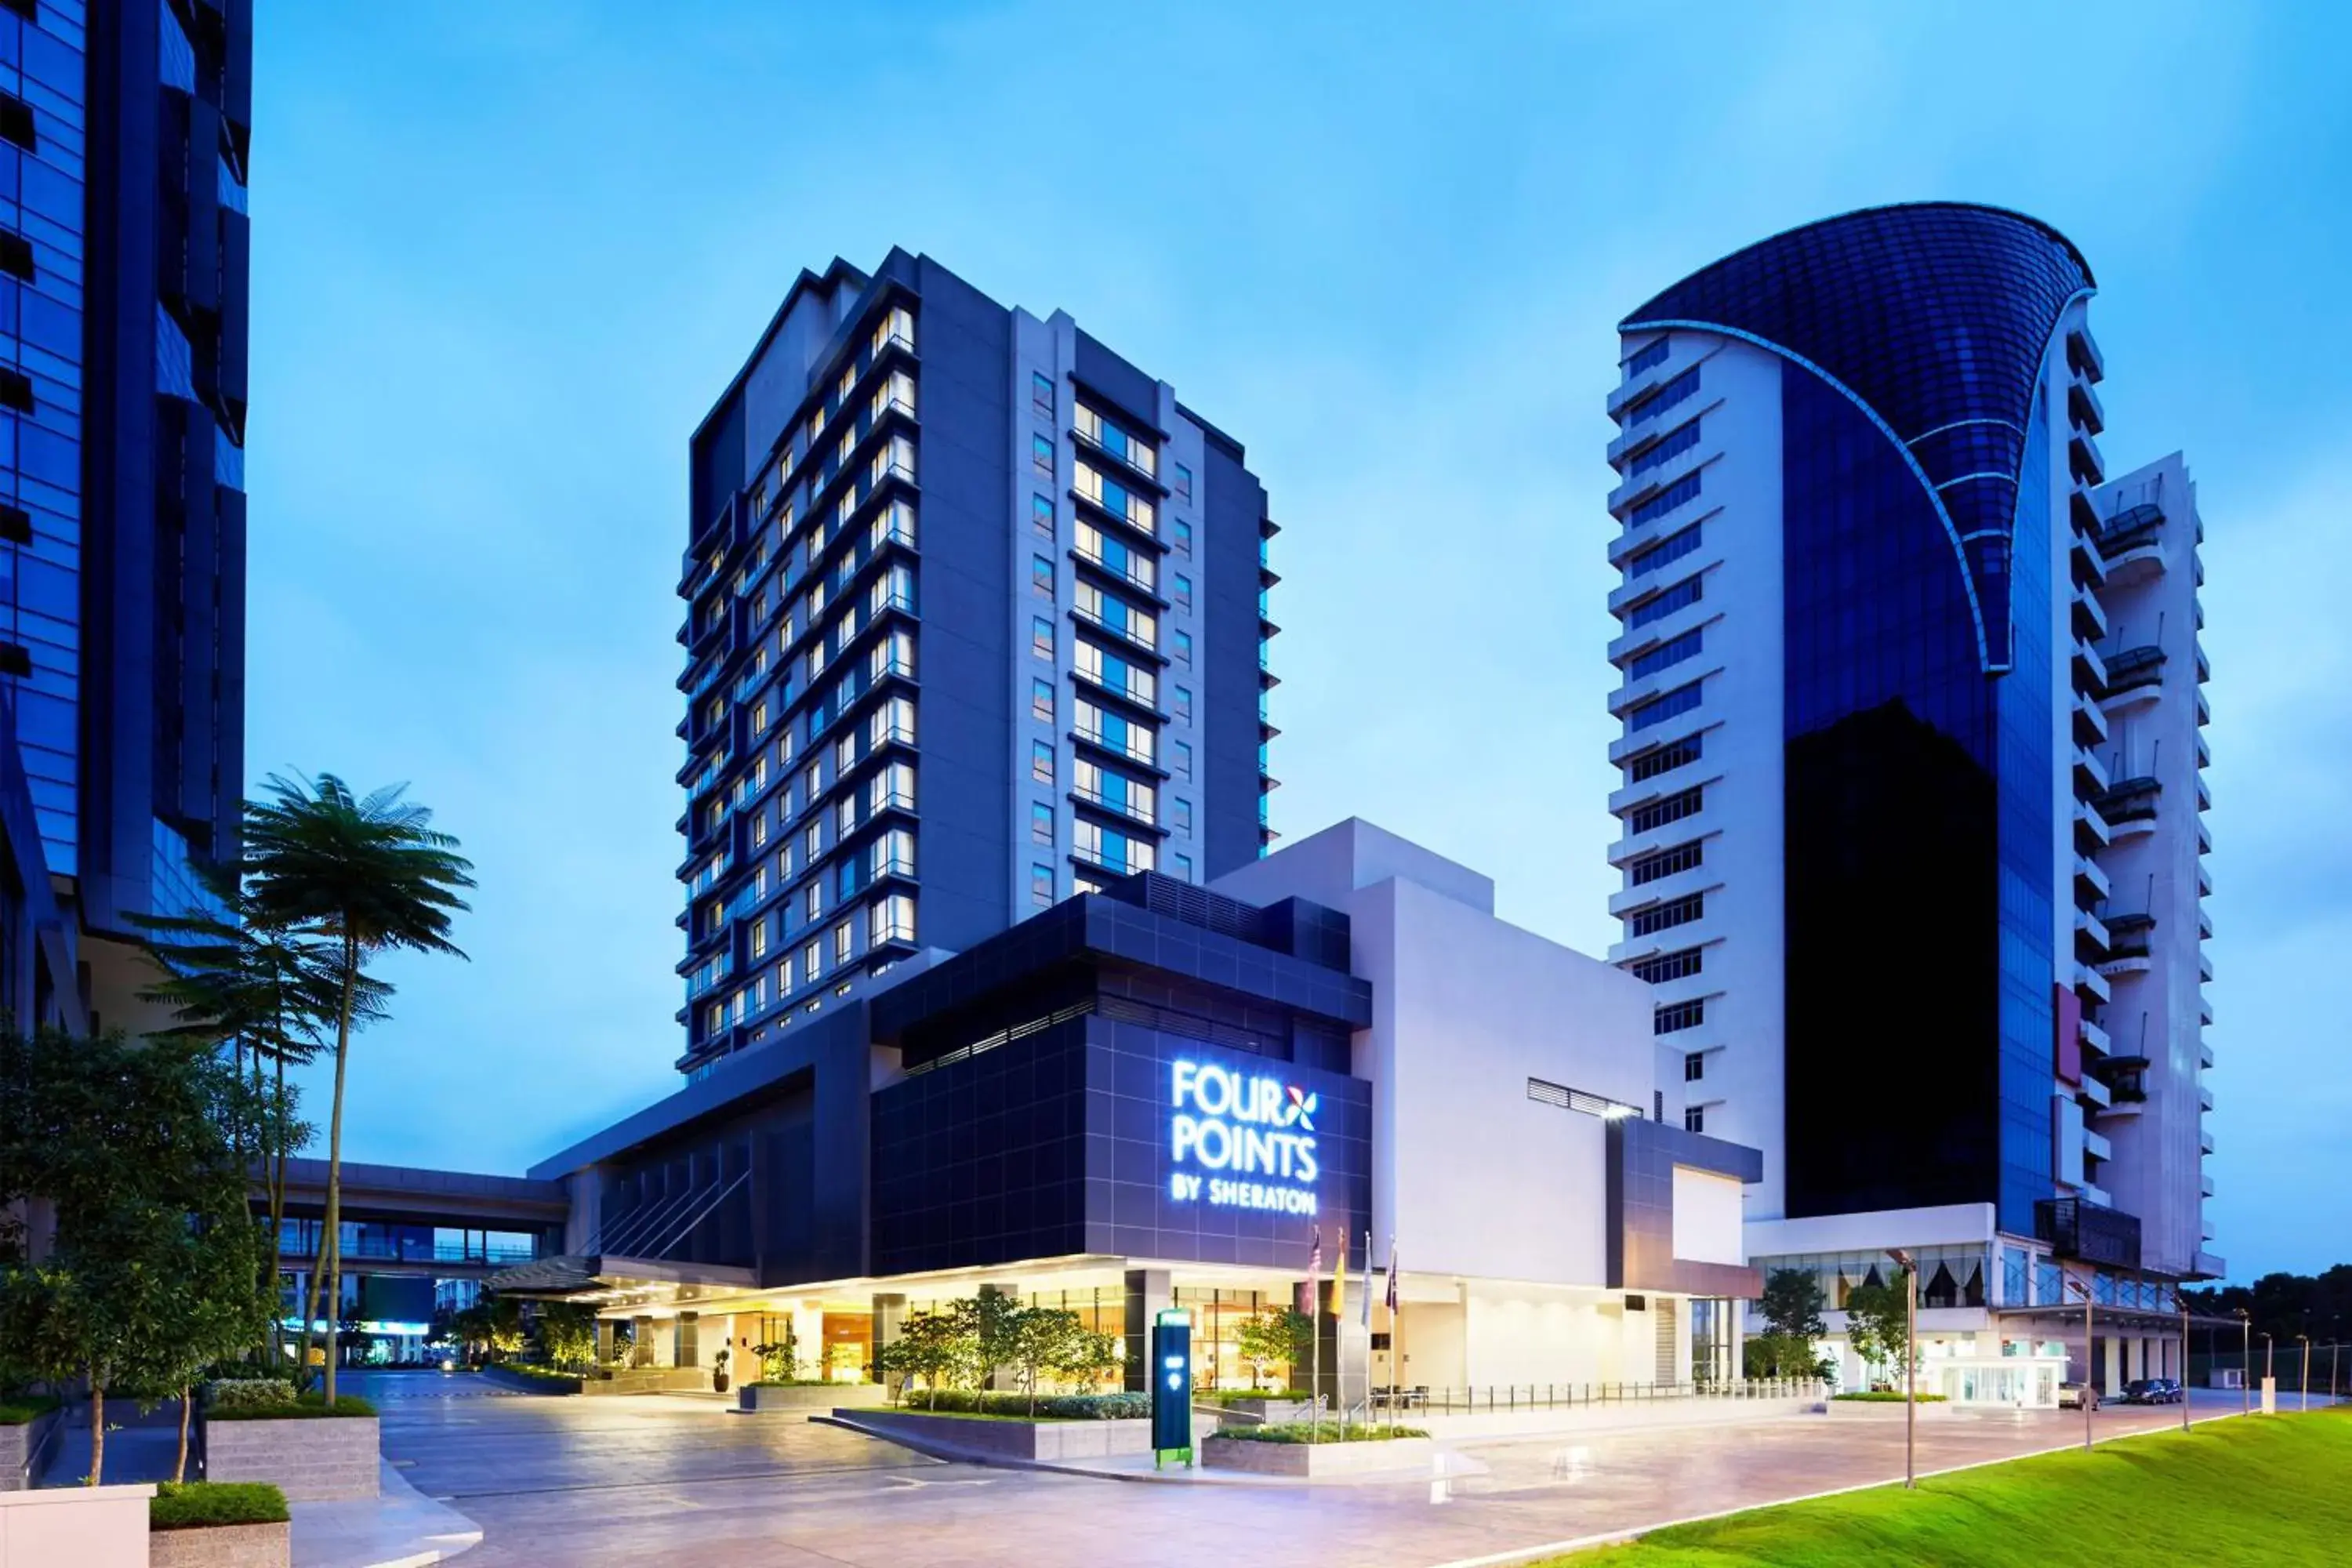 Property Building in Four Points by Sheraton Puchong